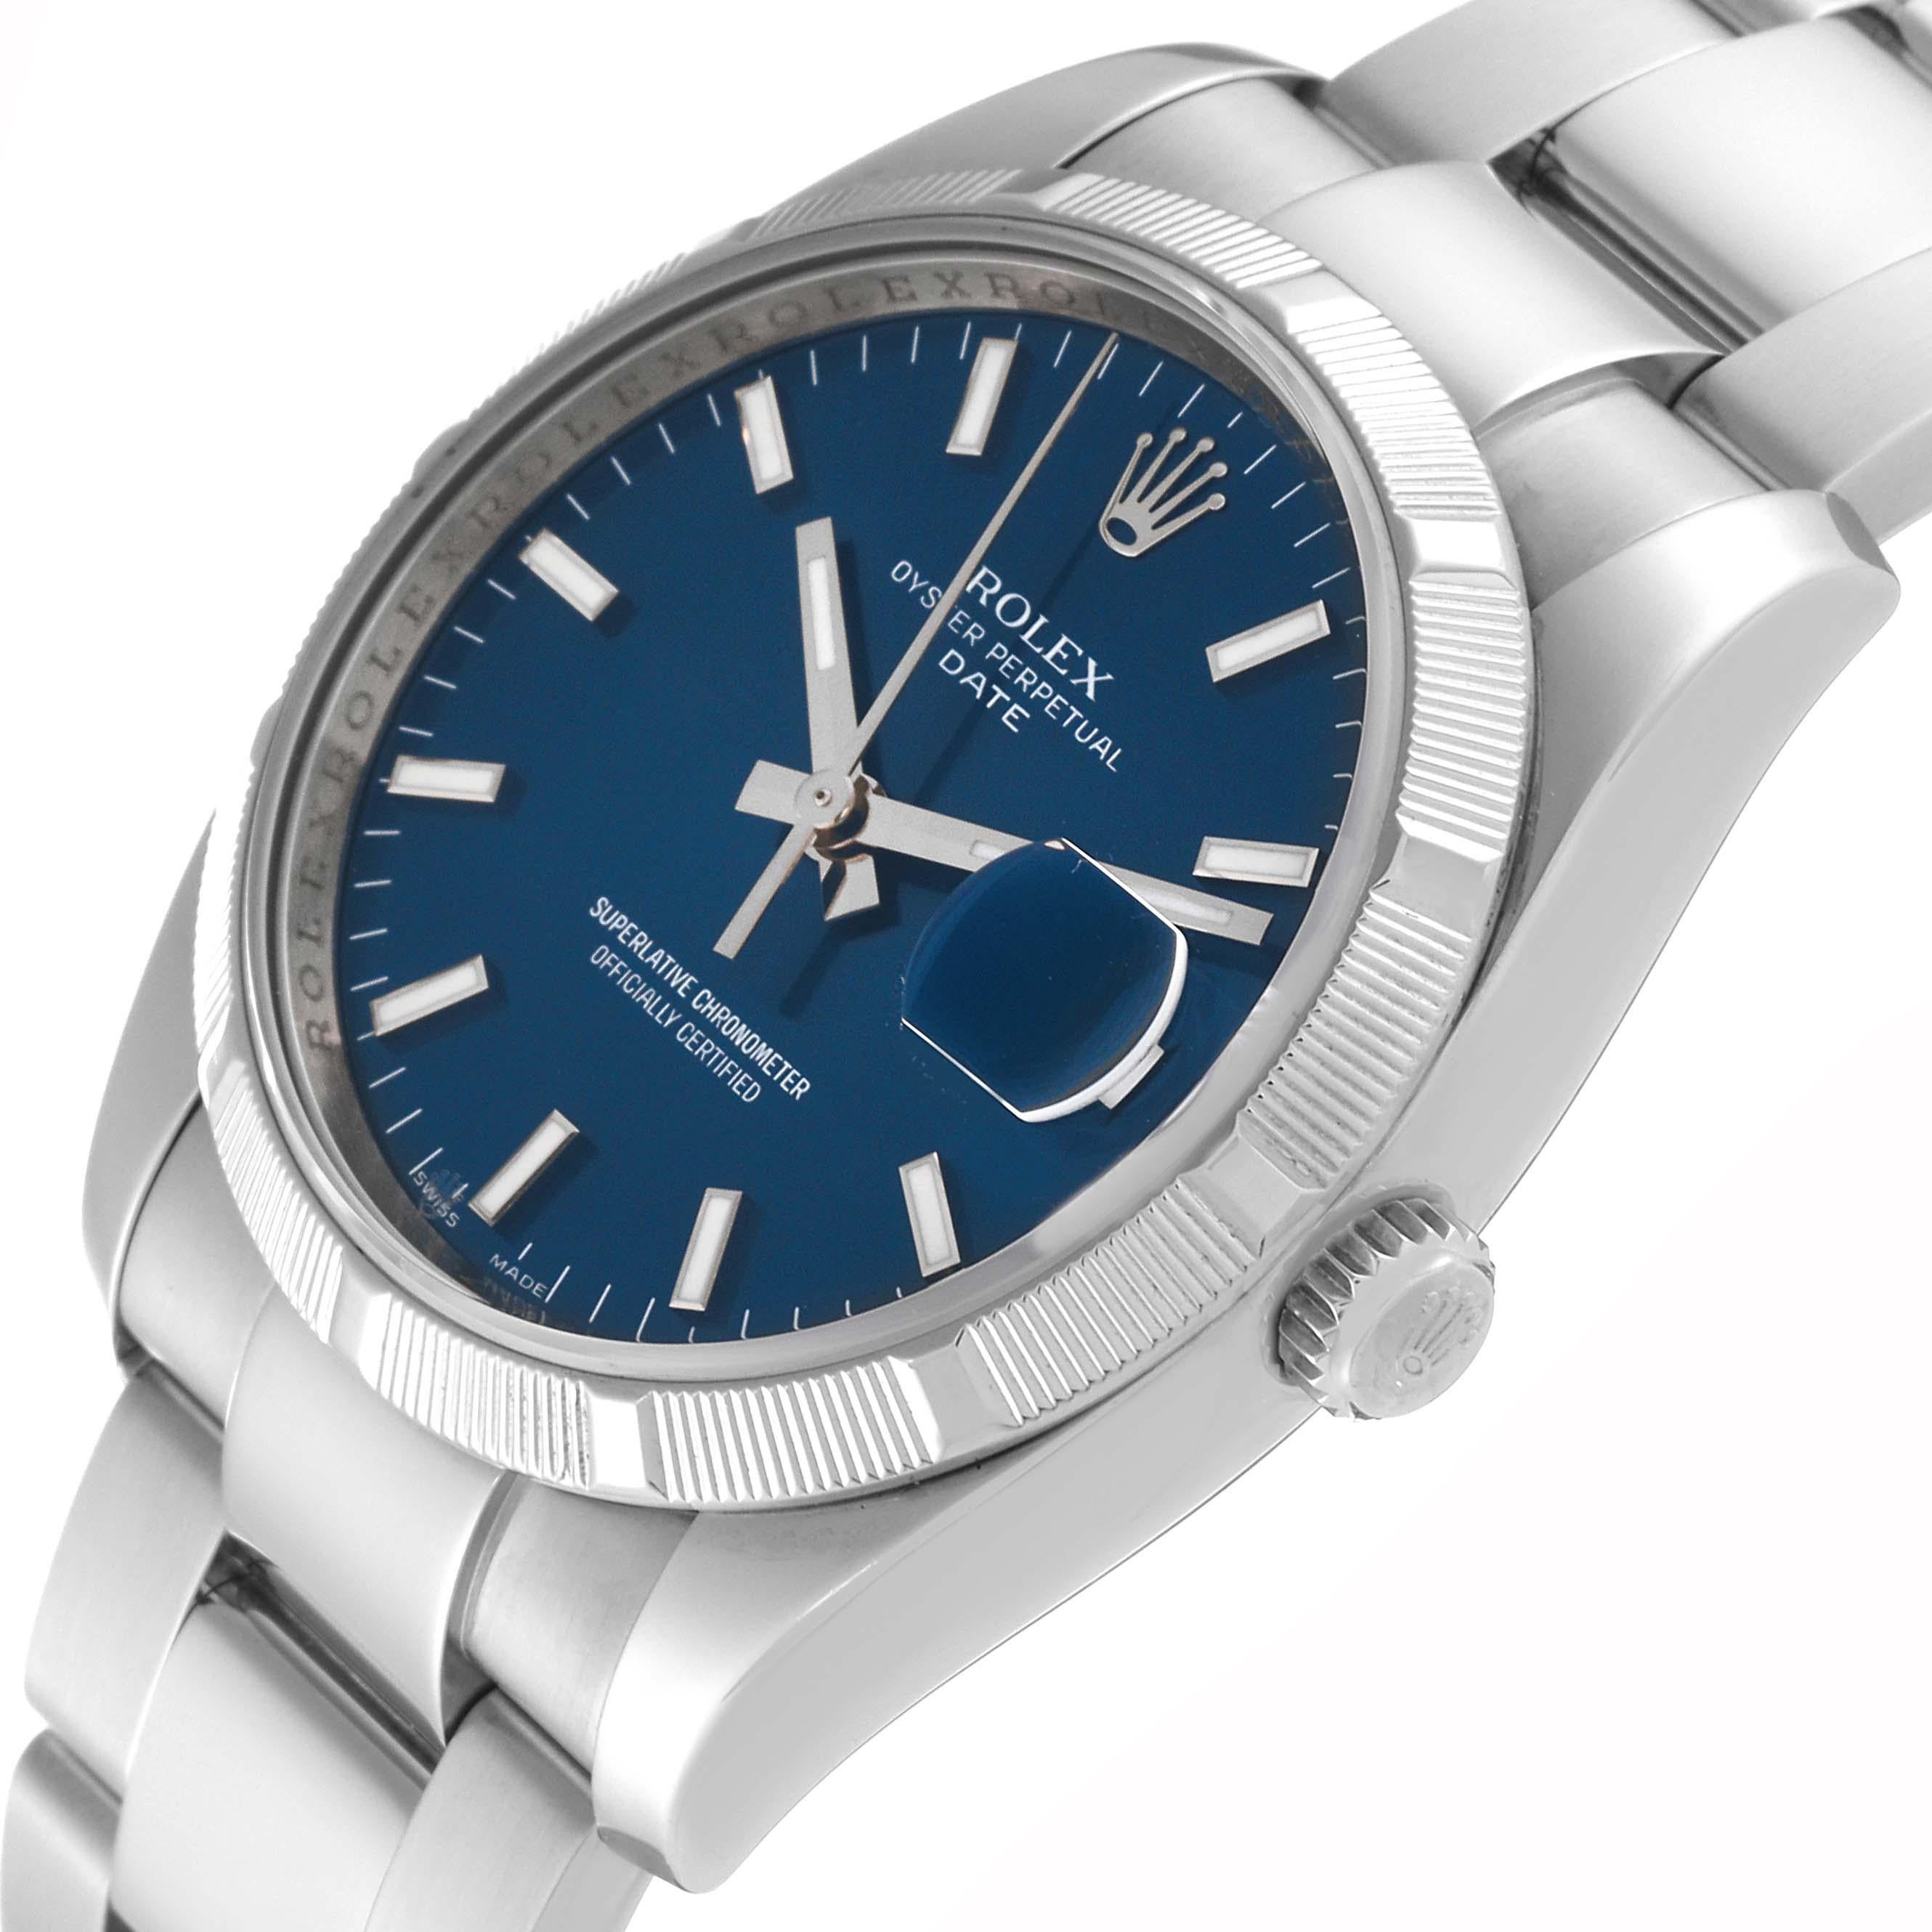 Rolex Date Steel Blue Dial Oyster Bracelet Automatic Mens Watch 115210 In Excellent Condition For Sale In Atlanta, GA